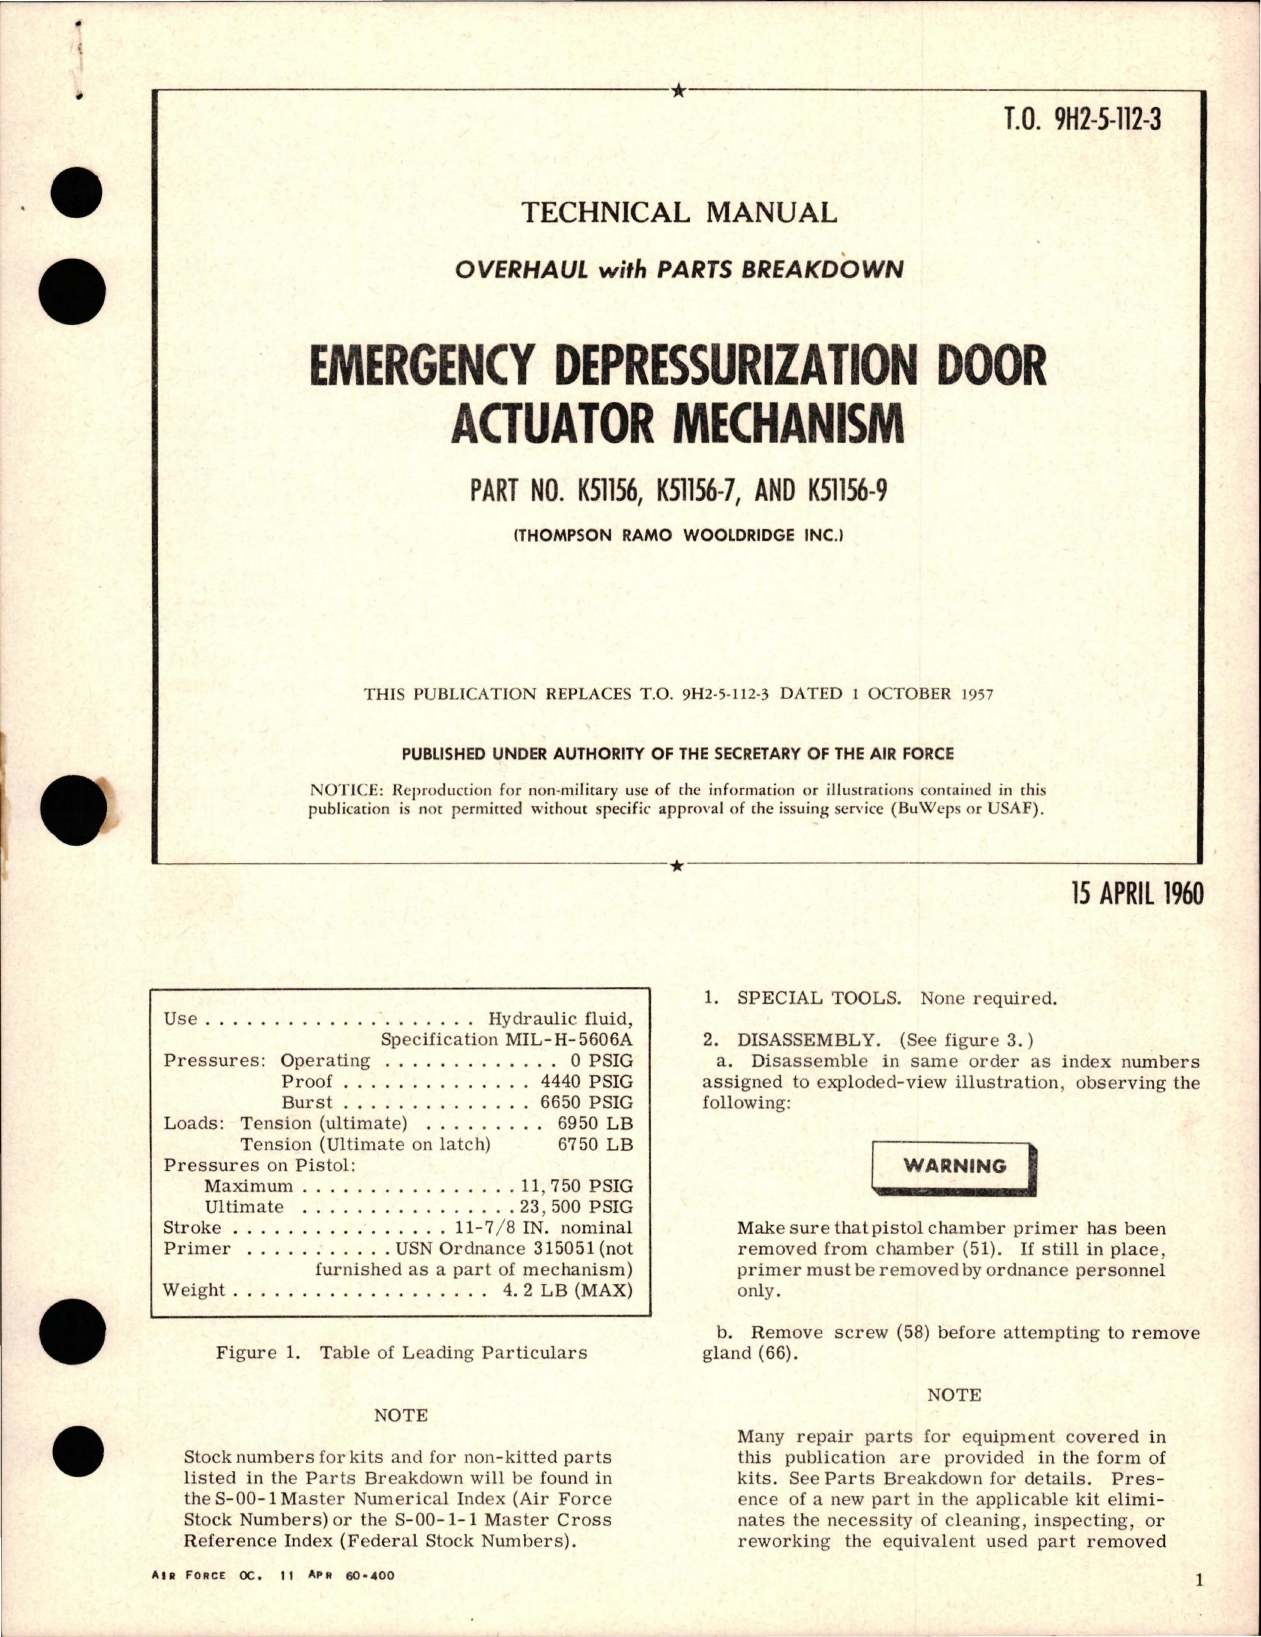 Sample page 1 from AirCorps Library document: Overhaul with Parts Breakdown for Emergency Depressurization Door Actuator Mechanism - Parts K51156, K51156-7, and K51156-9